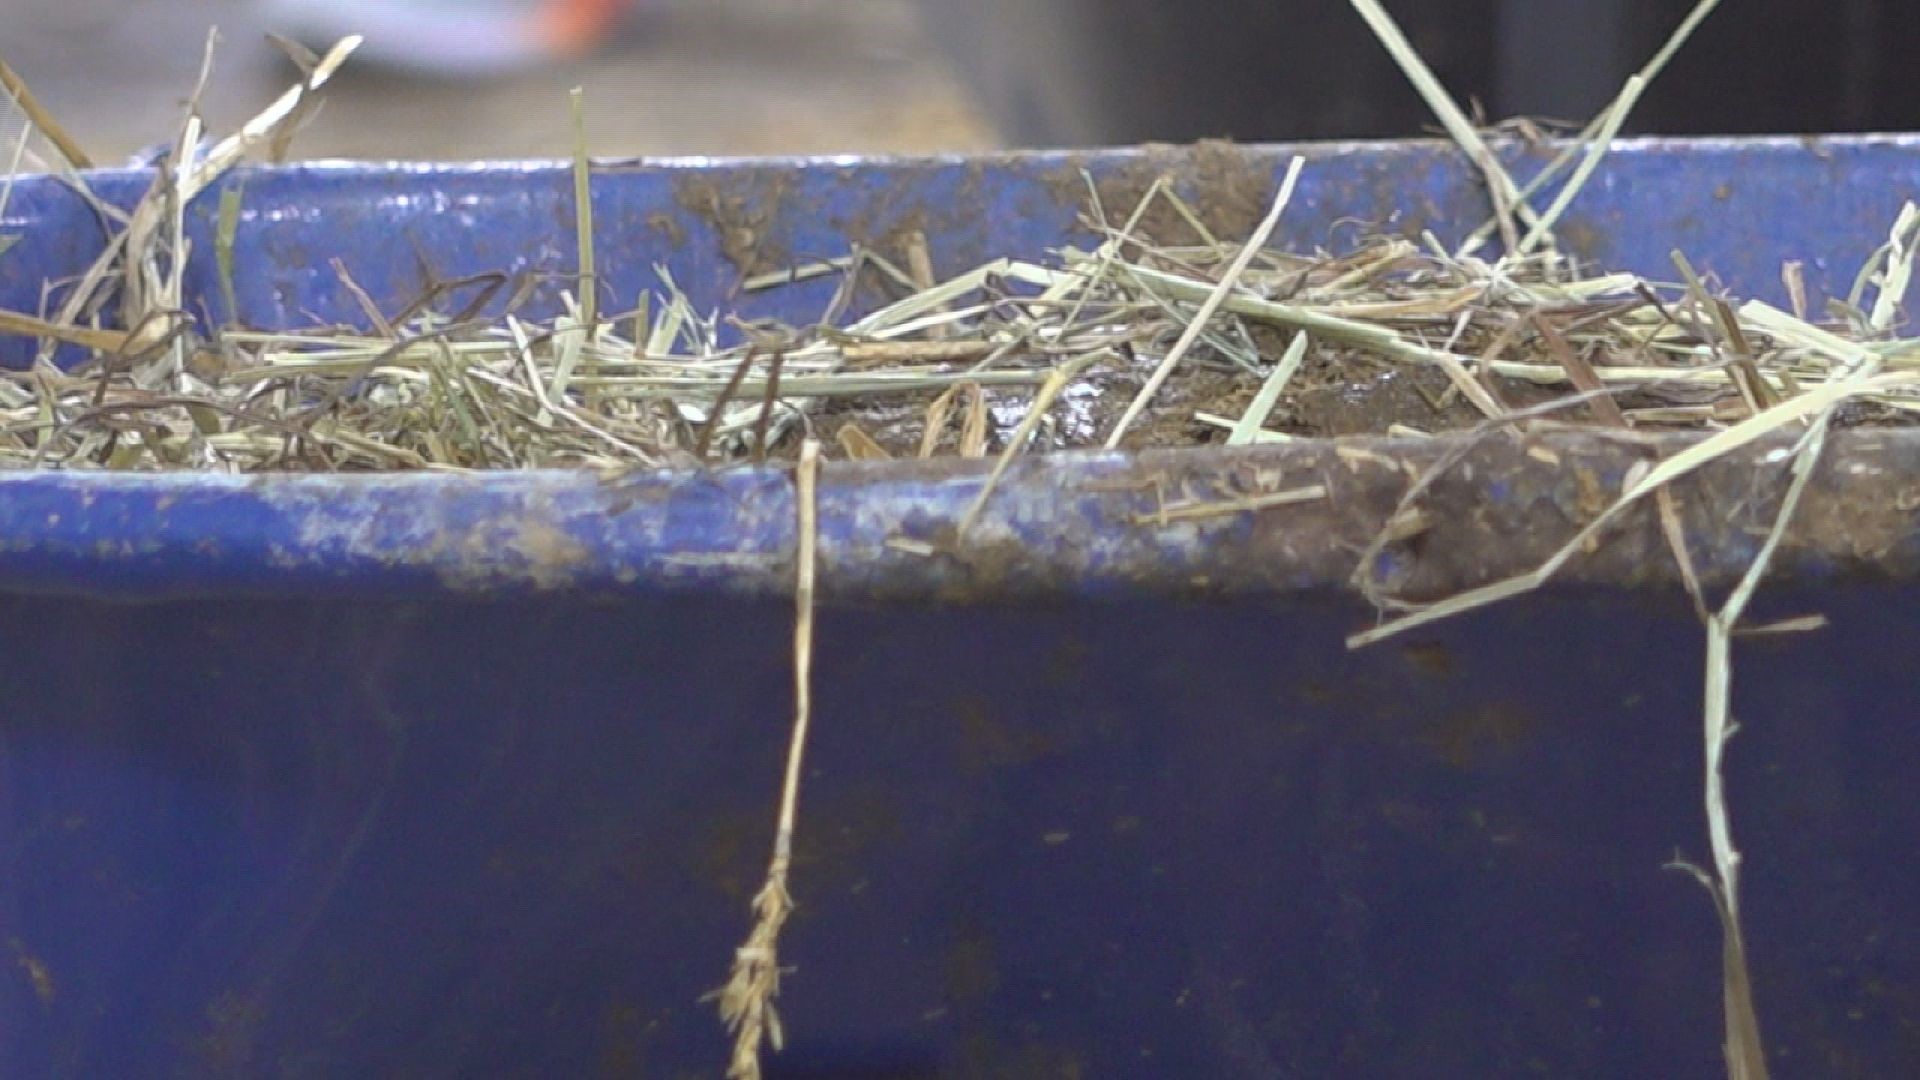 Animal droppings from the eight day long event are recycled for use on farms across the commonwealth.